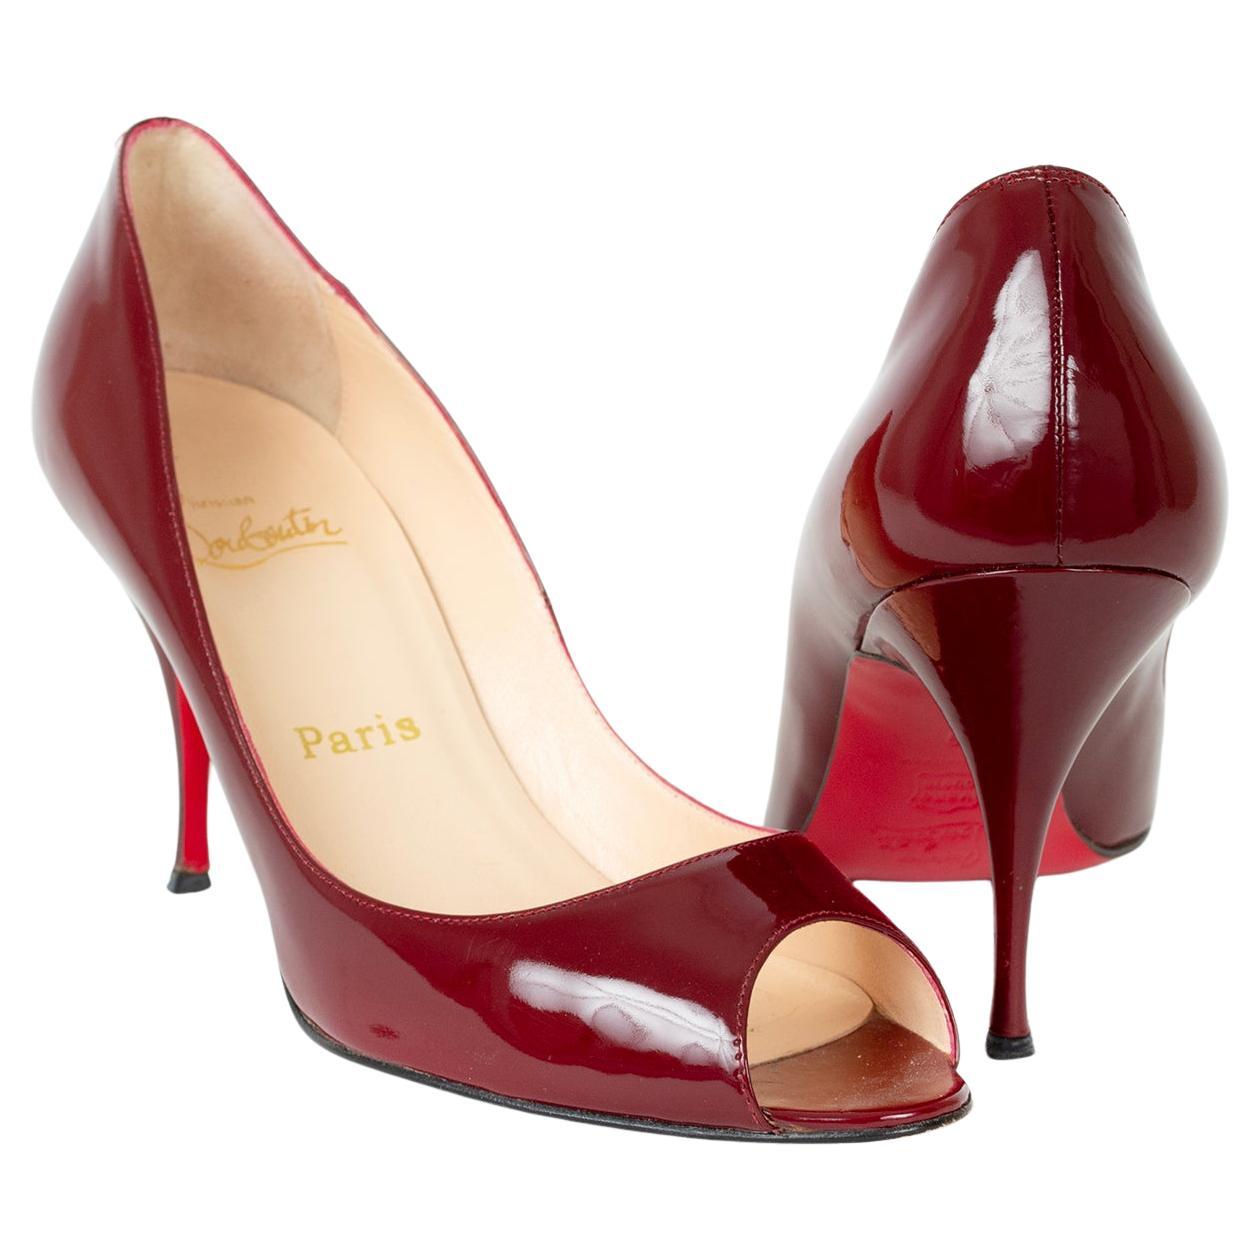 Christian Louboutin Burgundy Patent Clare Peep Toe Stiletto, 80 mm - 39, 2002 For Sale